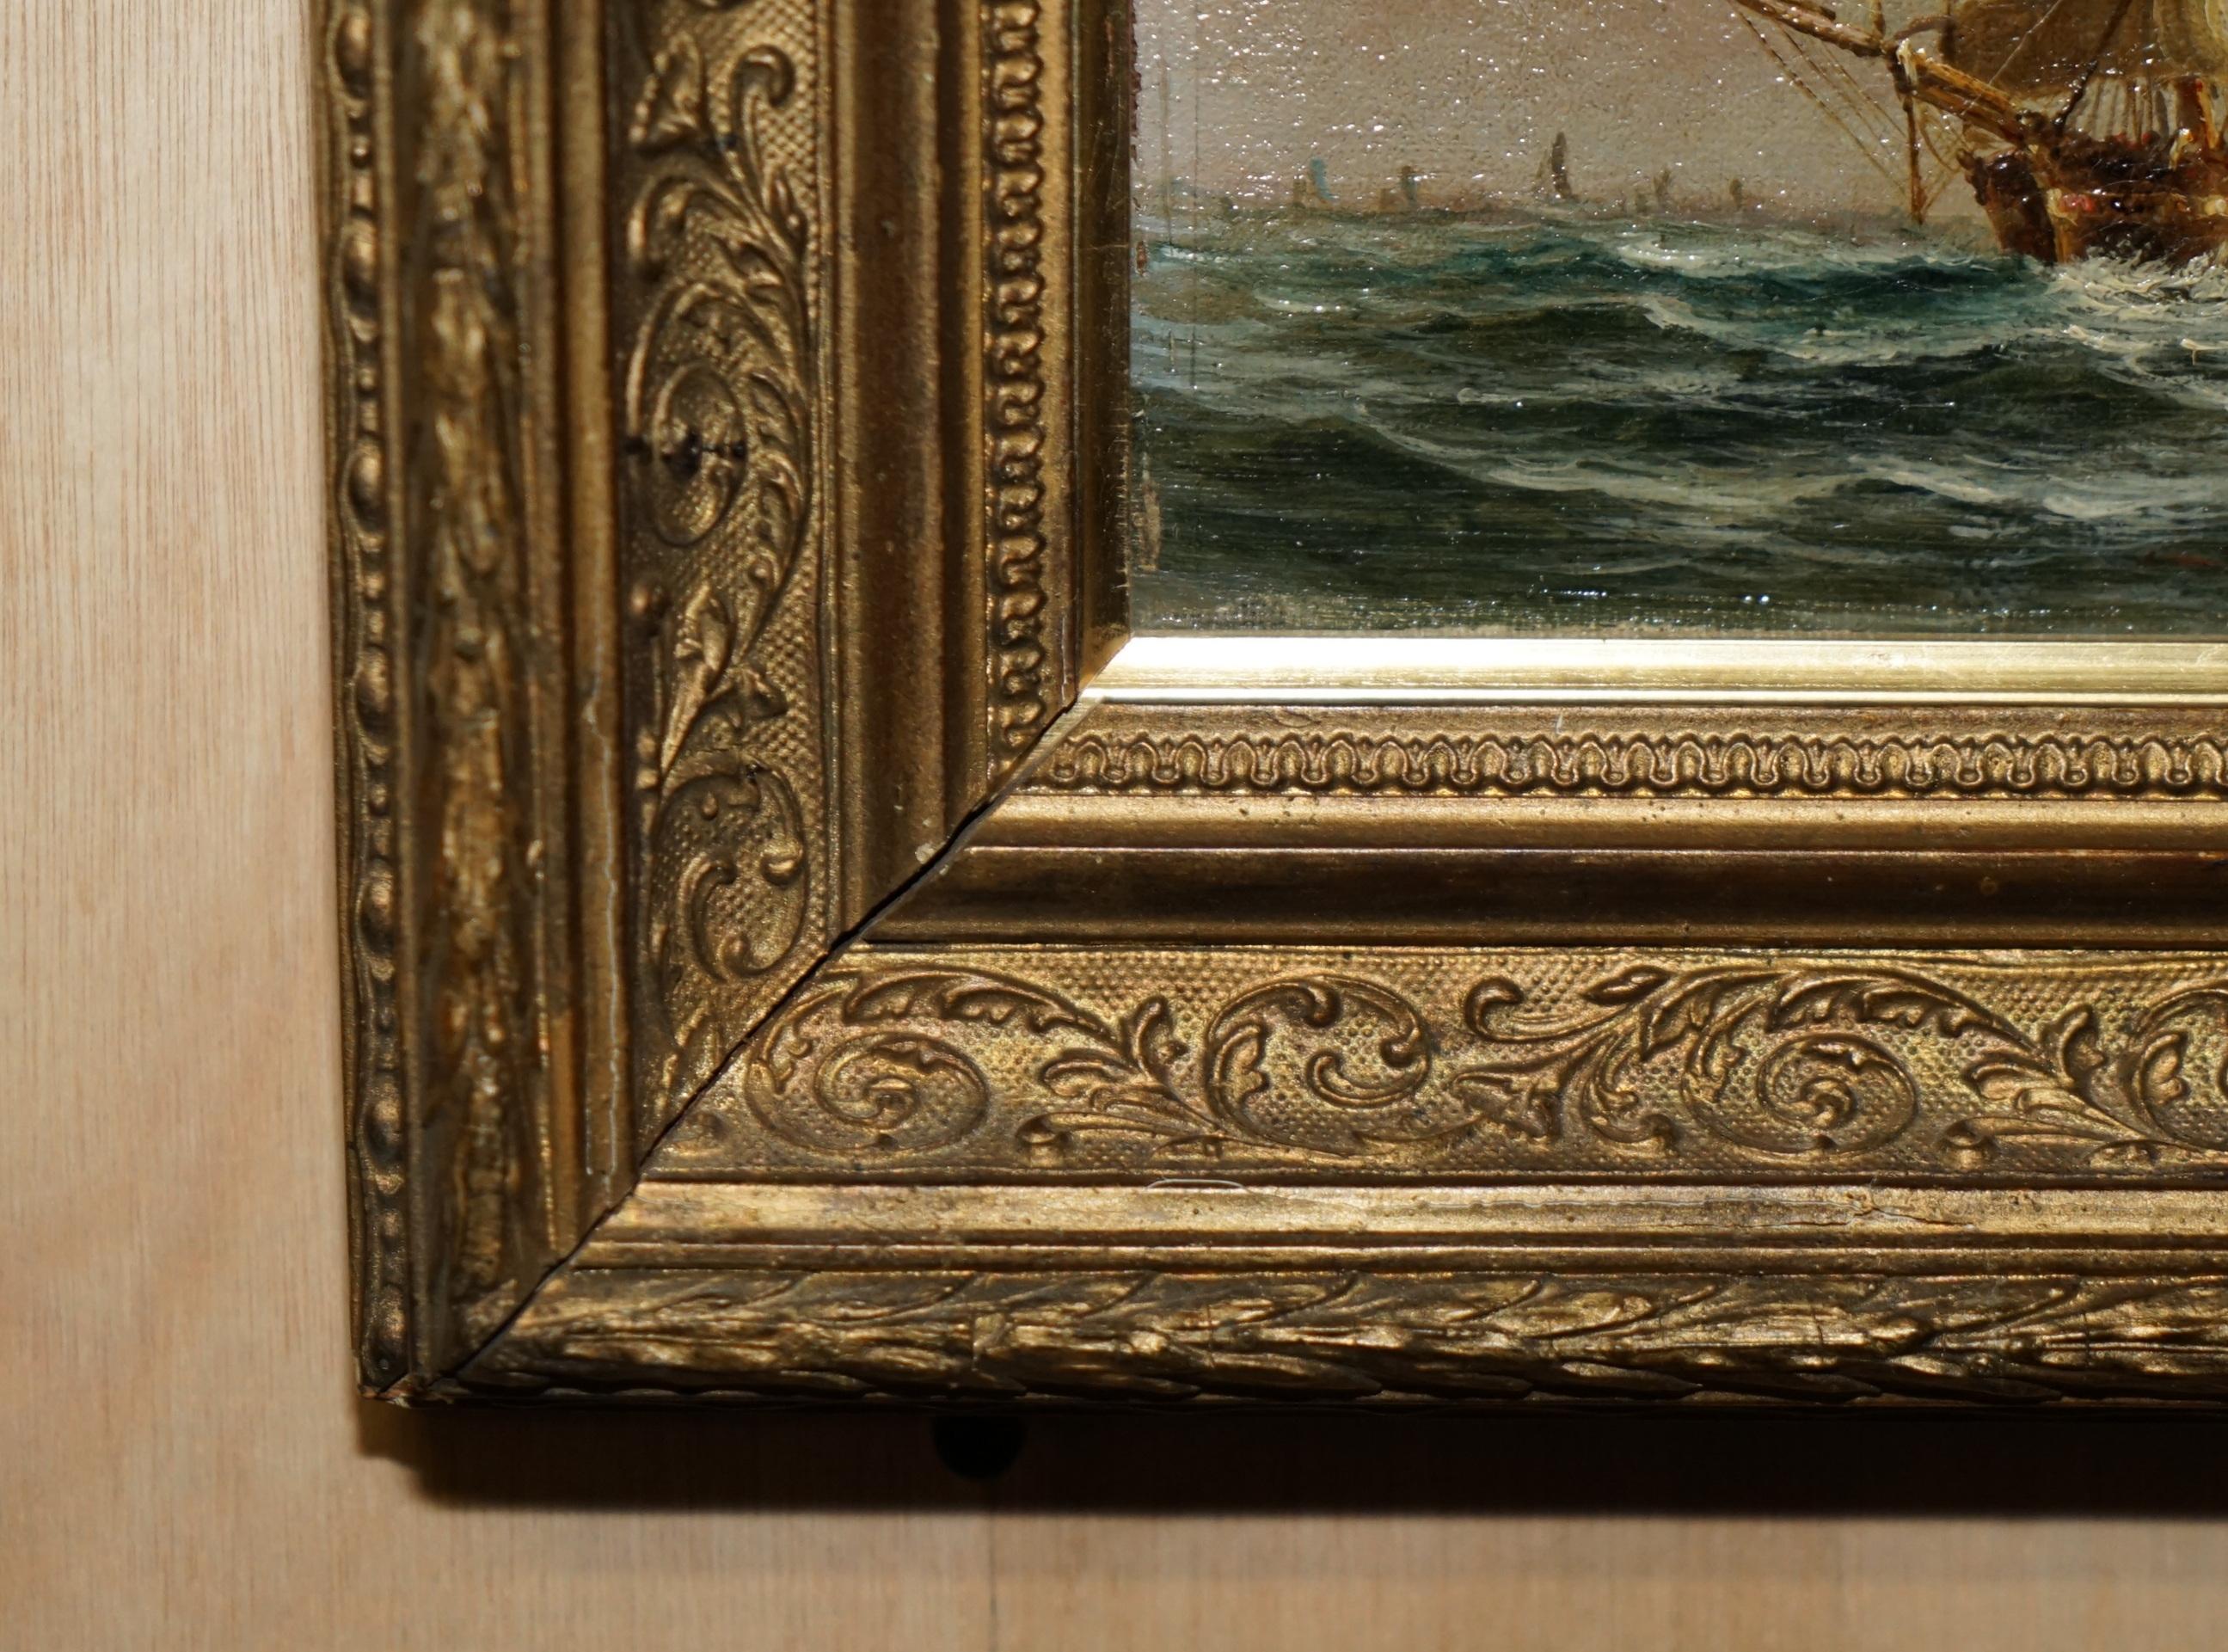 SMALL ANTIQUE NAUTICAL VICtoriaN OIL PAiNTING OF A EARLY 19TH Century SHIP en vente 2